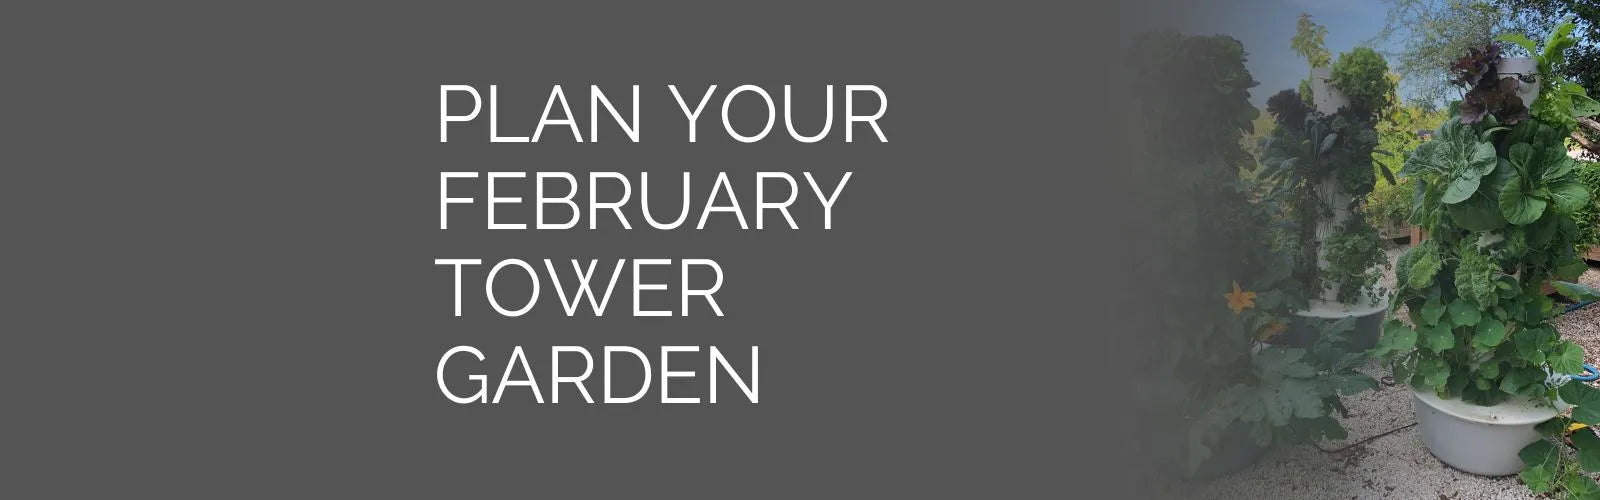 Plan your February Tower Garden